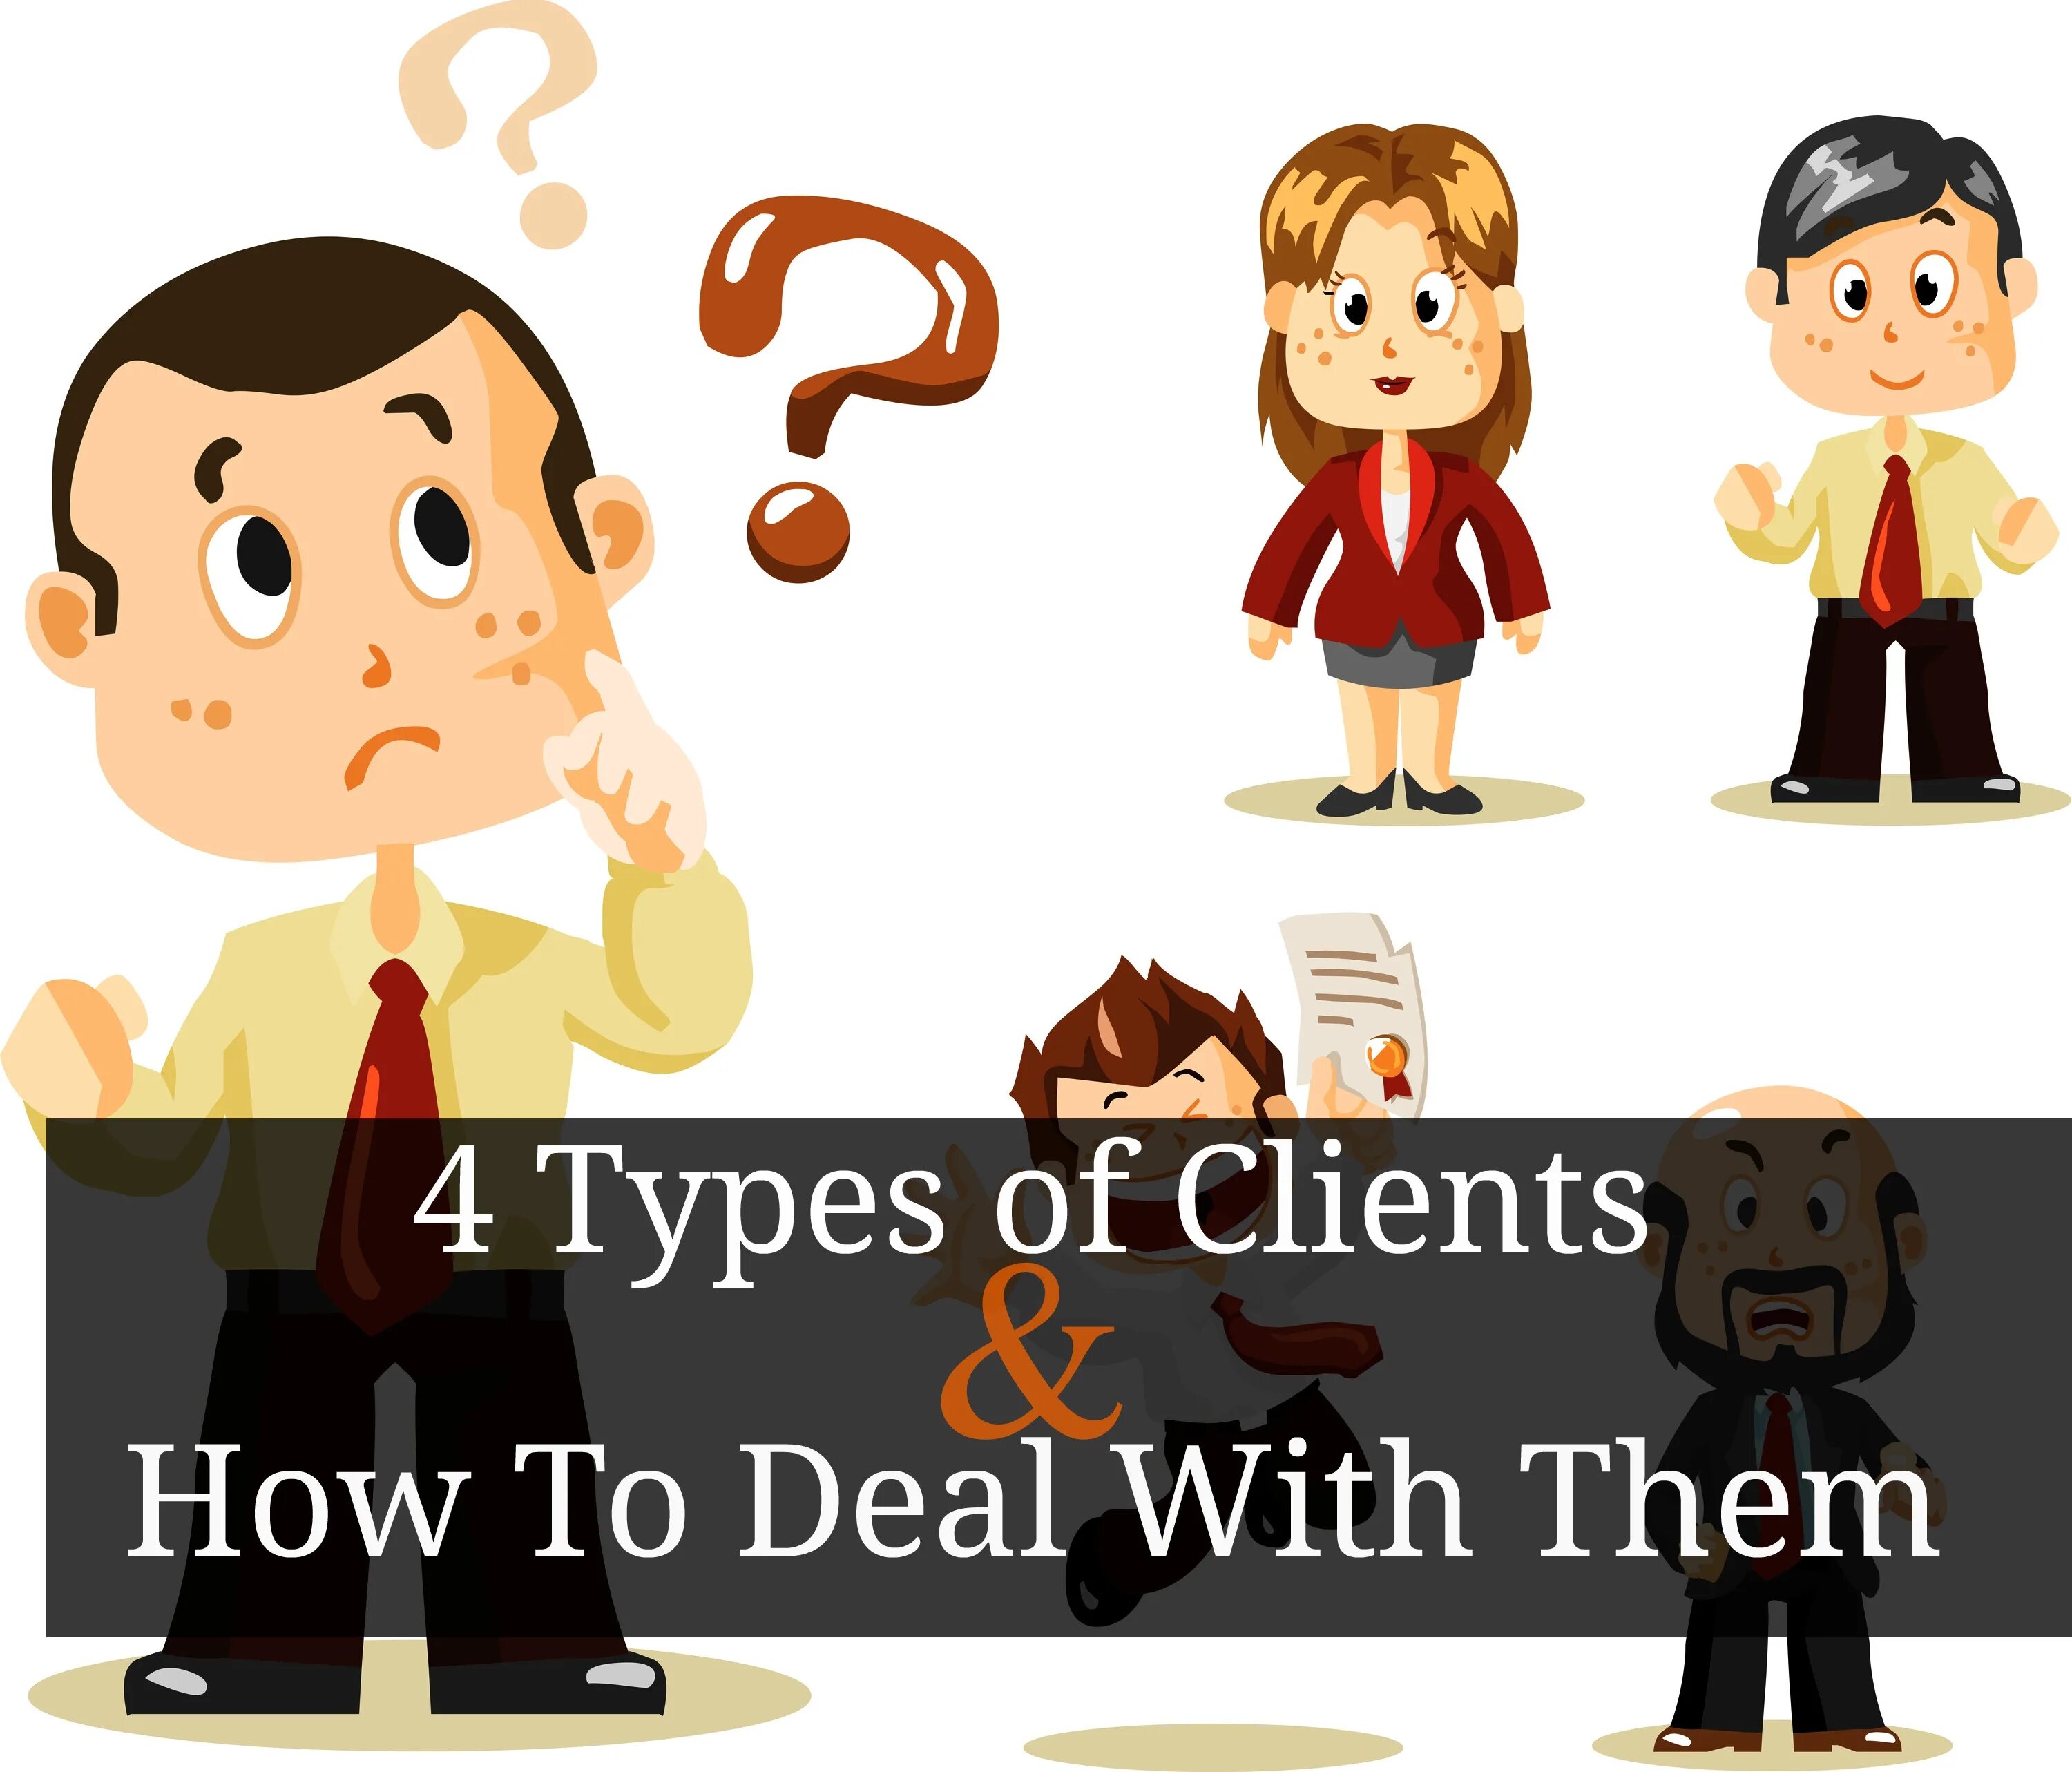 Types of clients. So how to deal with that. Client type 1